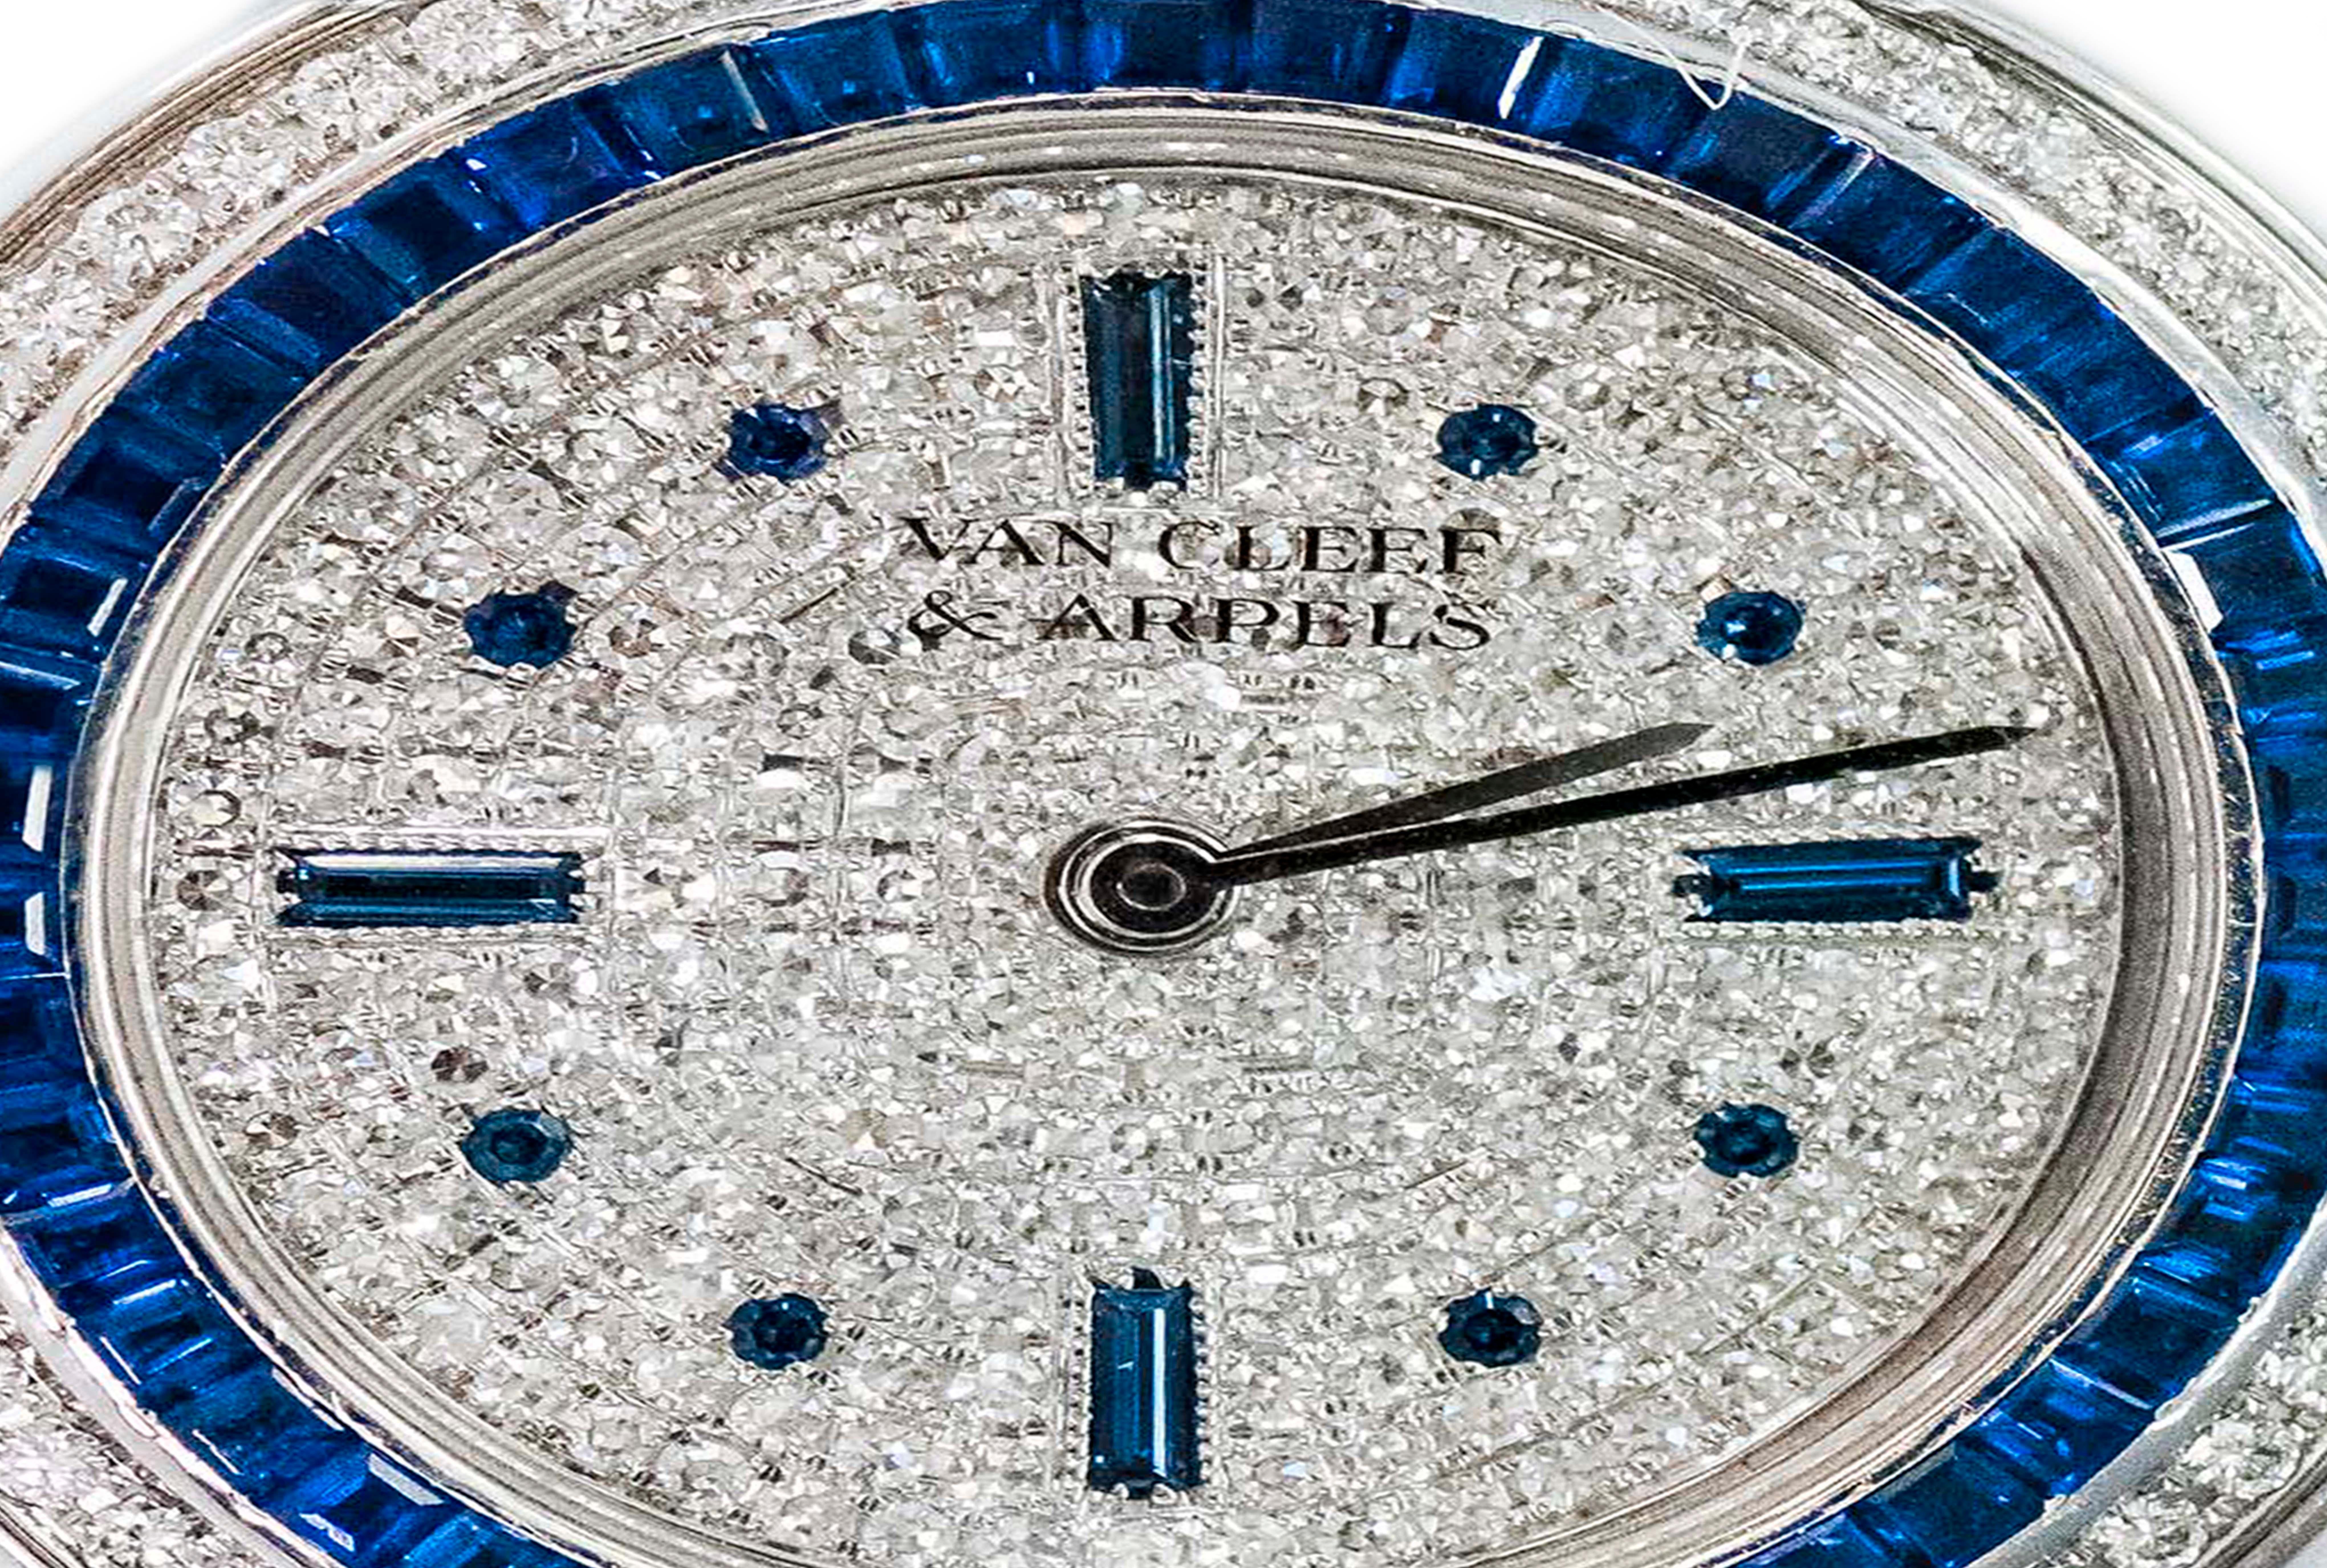 A Rare Limited Edition 1990 Van Cleef & Arpels 18kt White gold Pave Diamond Dial & Channel Set Sapphire Bracelet Watch

Dimensions
* Case dimensions are 31mm x 31mm
* Fits up to a 170mm wrist size
* Fully Signed Case,Dial, Clasp
* Accompanied by Van